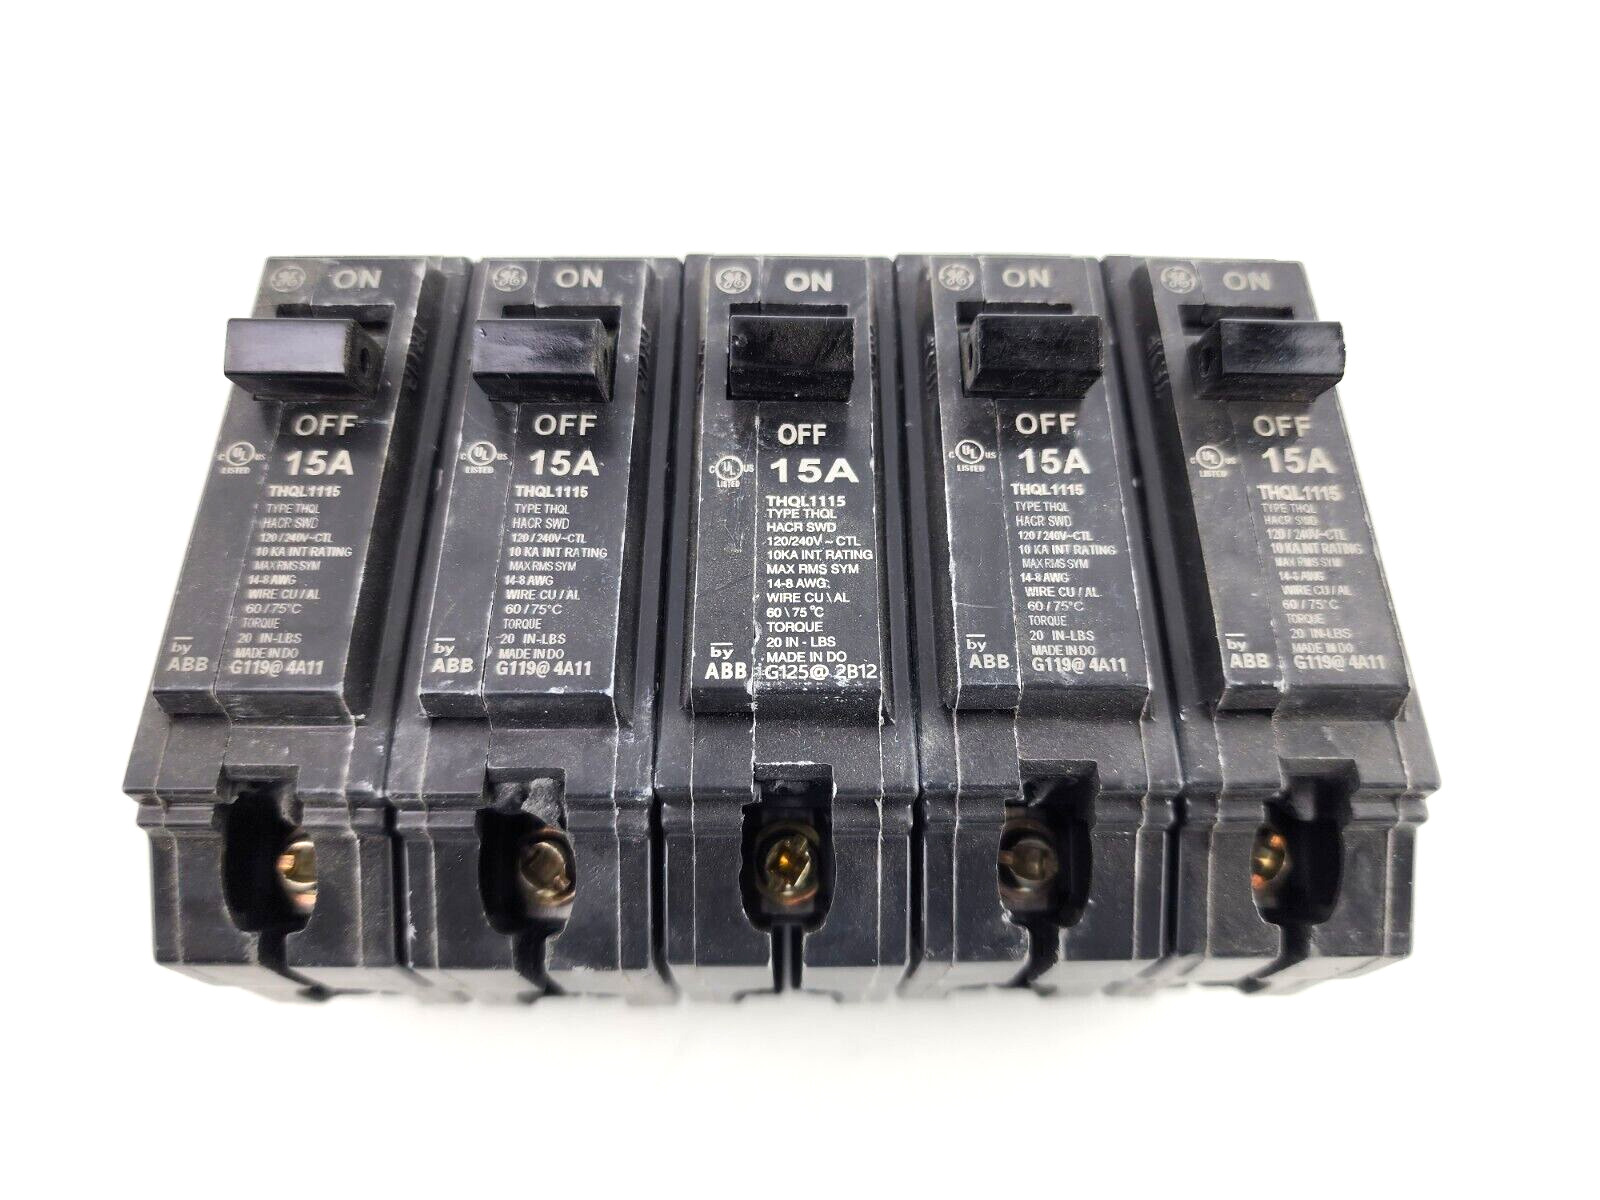 5pcs Used GE General Electric THQL1115 15A 1 Pole 120/240V Circuit Breaker